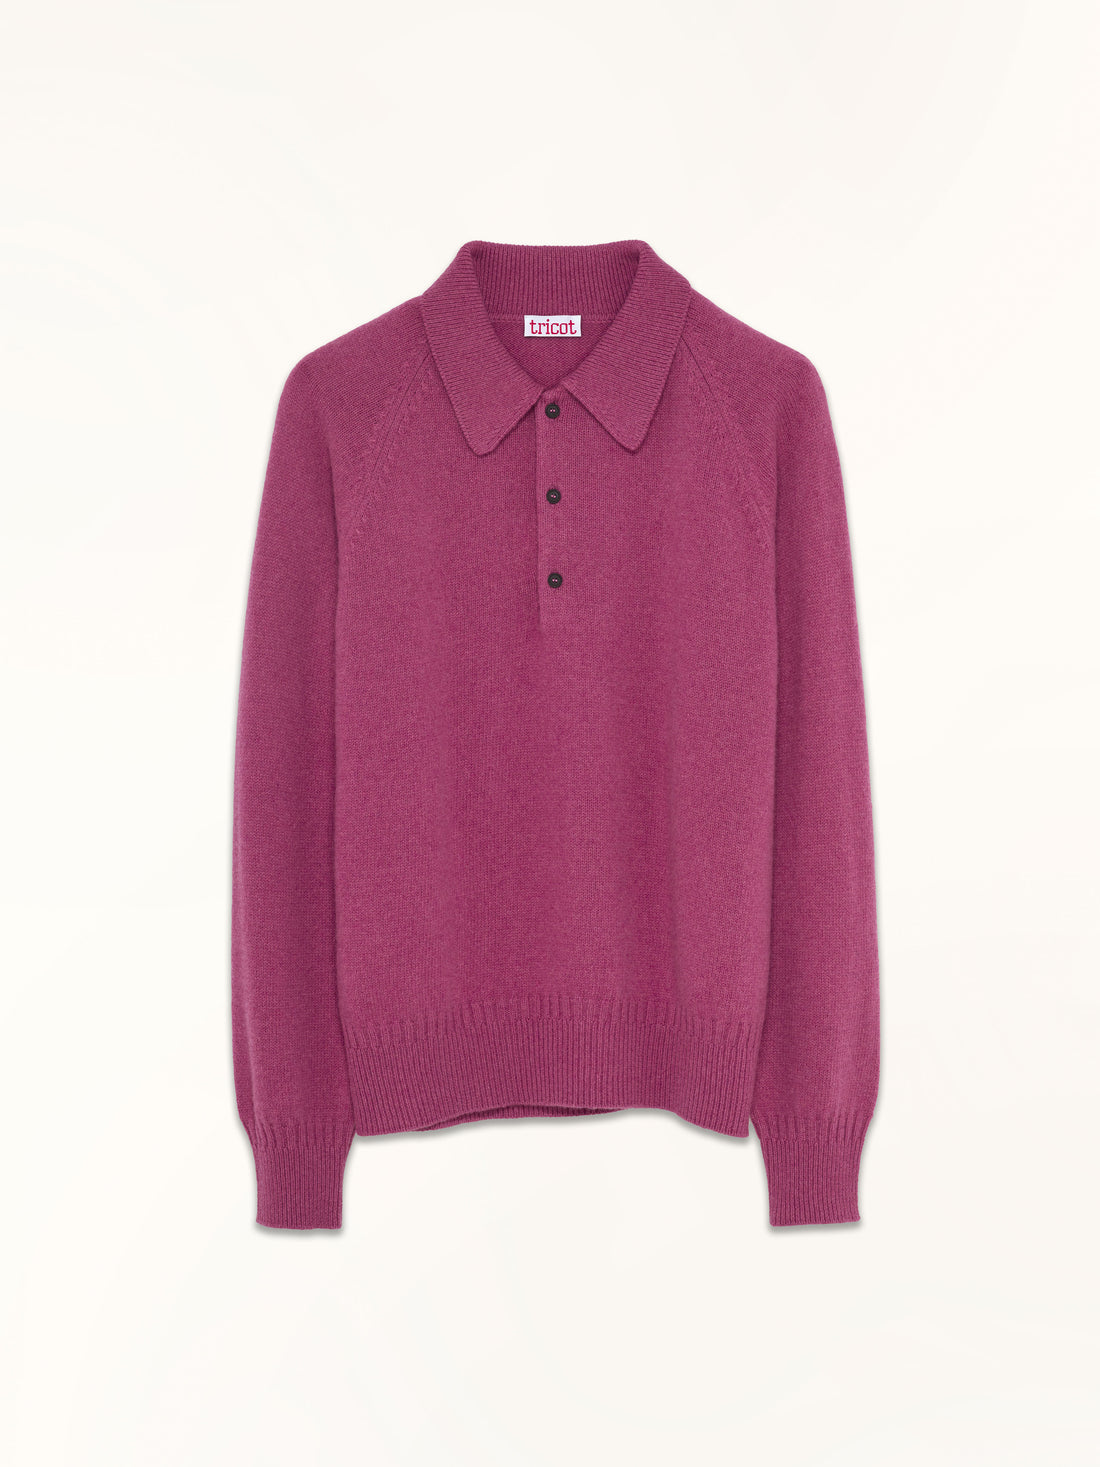 Women's Indian Pink cashmere polo